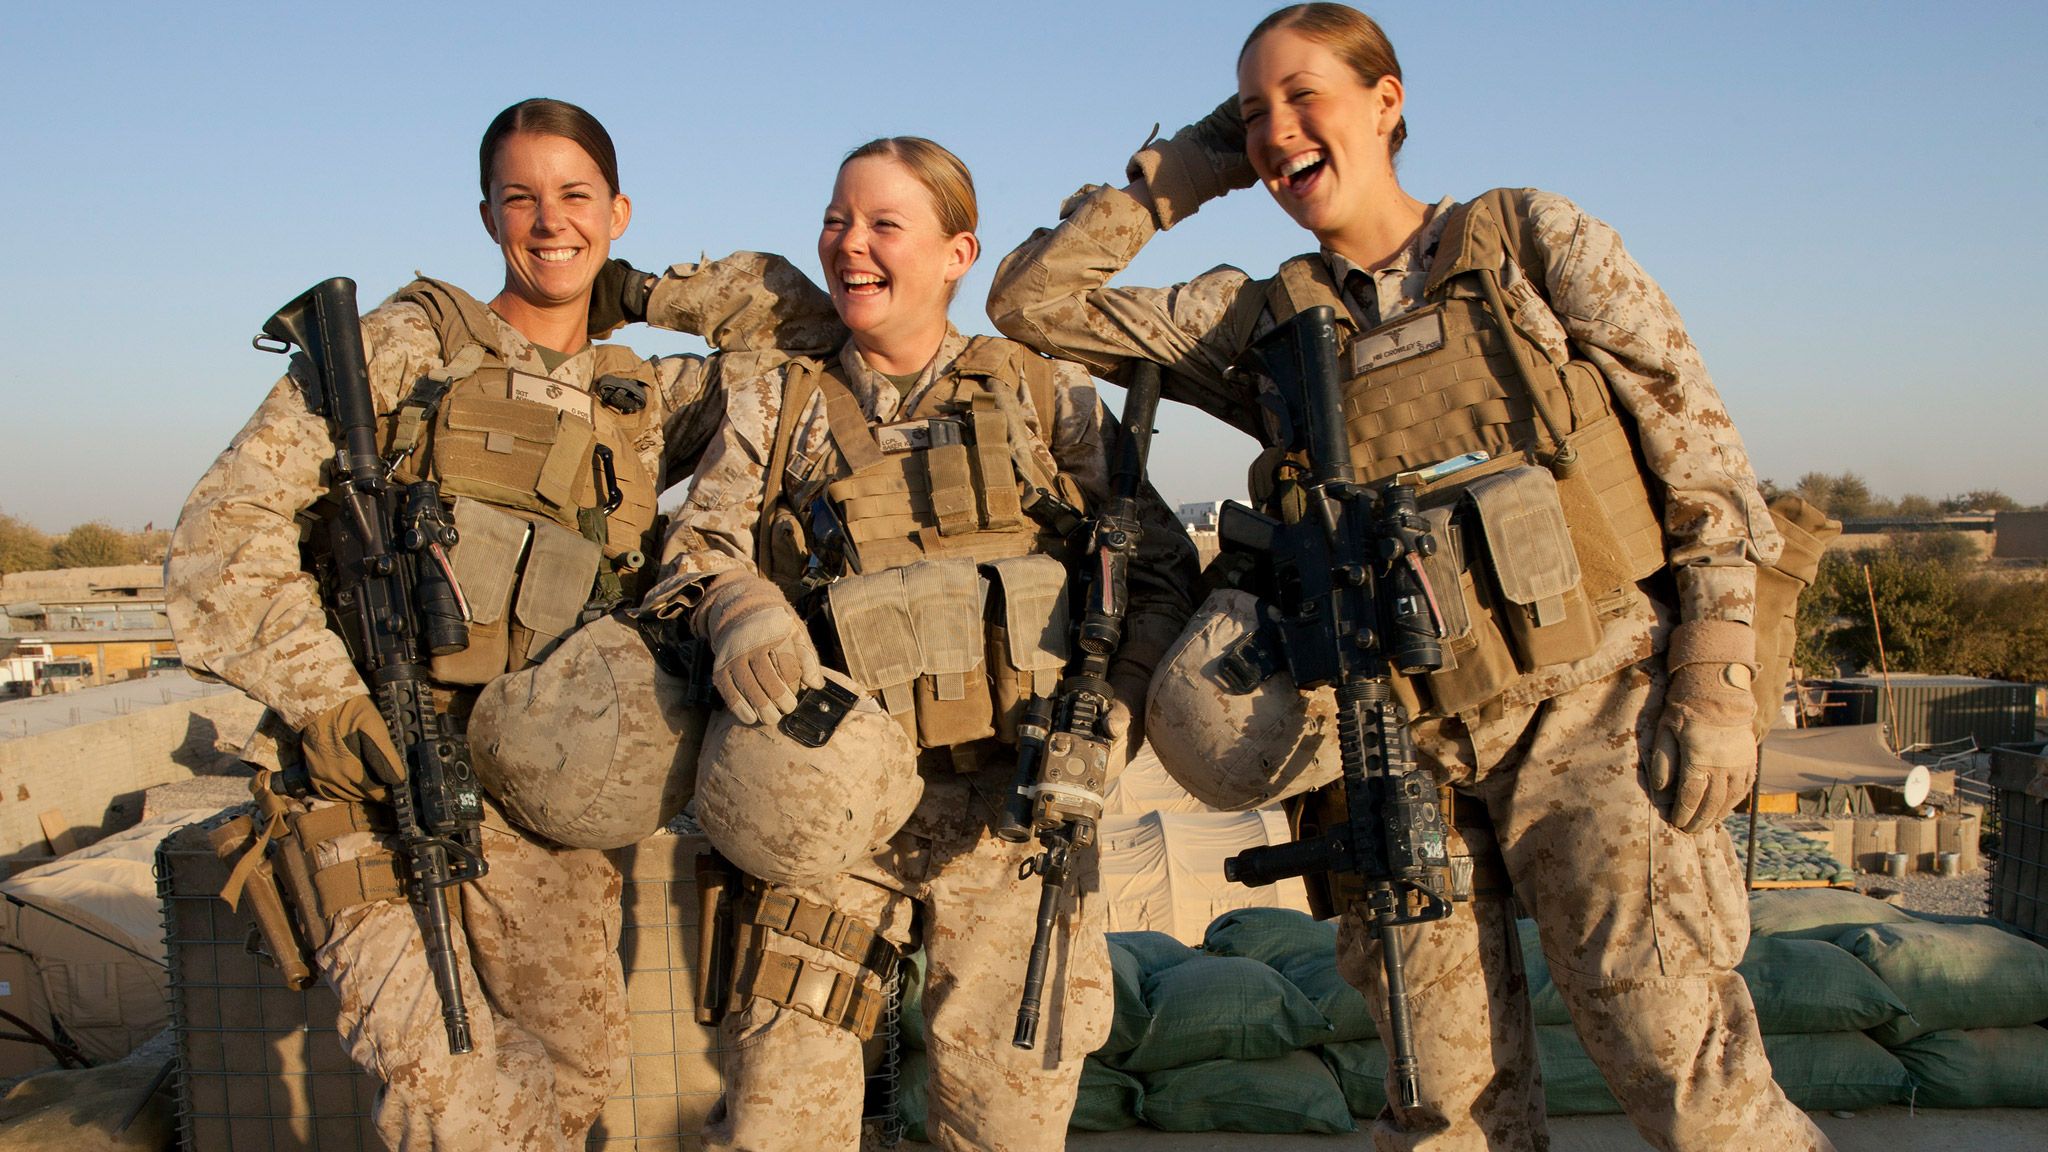 UK military to review ban on women in combat roles